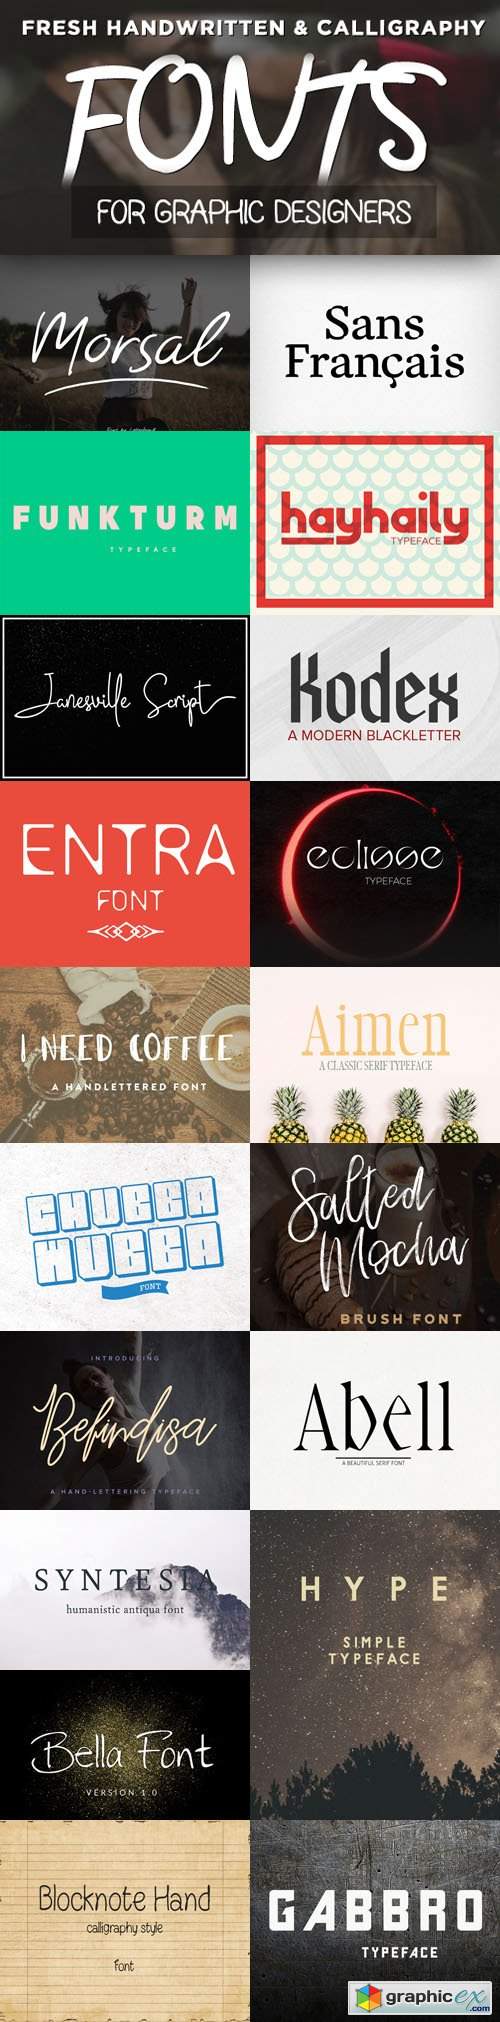 19 Fresh Fonts for Web & Graphic Designers